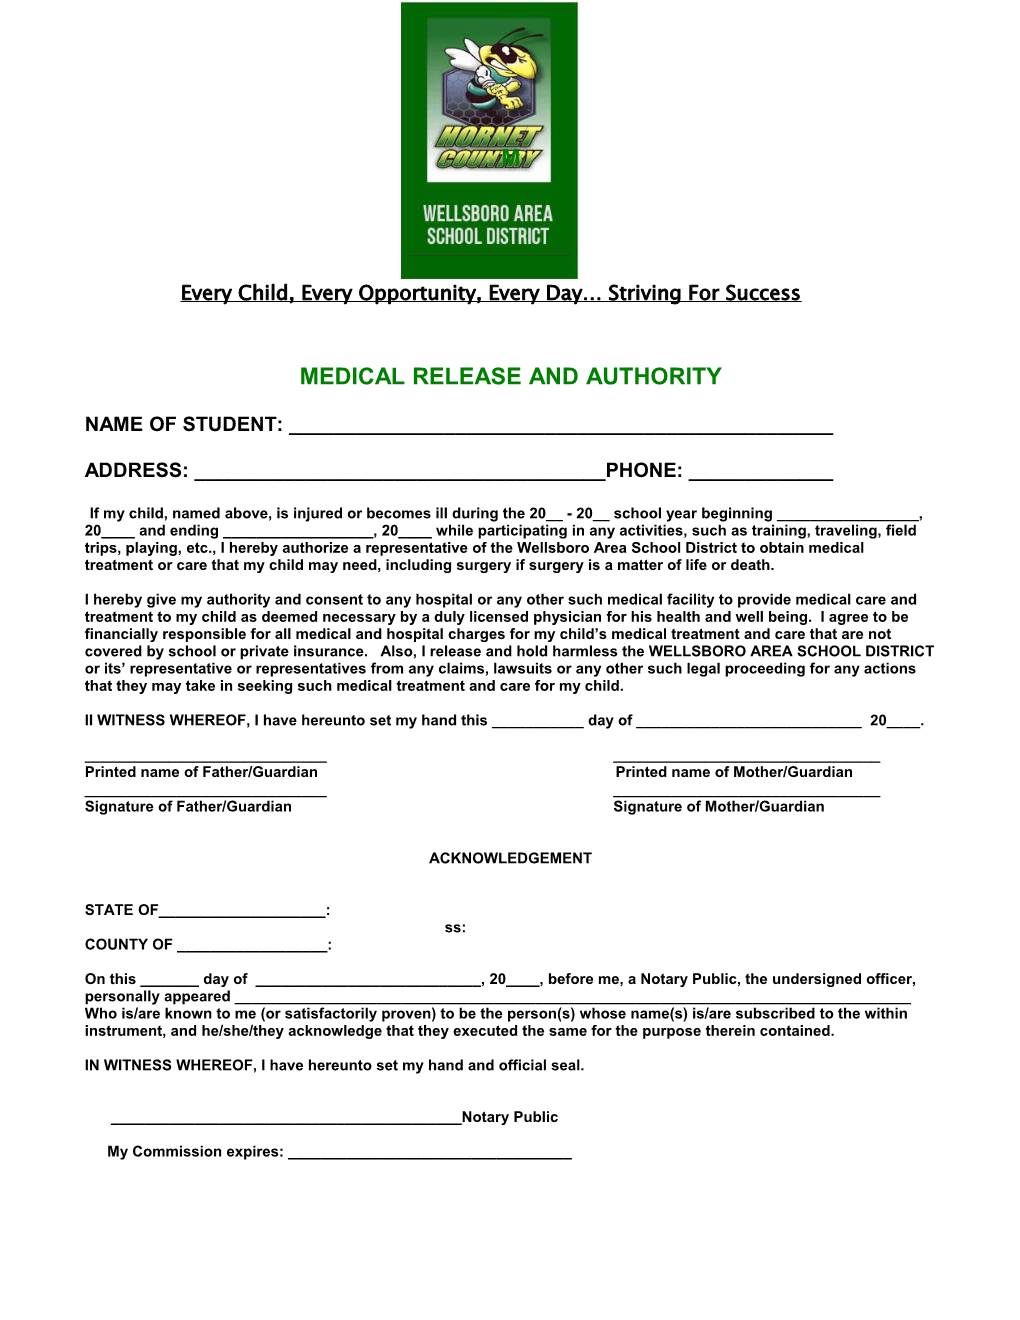 Medical Release and Authority